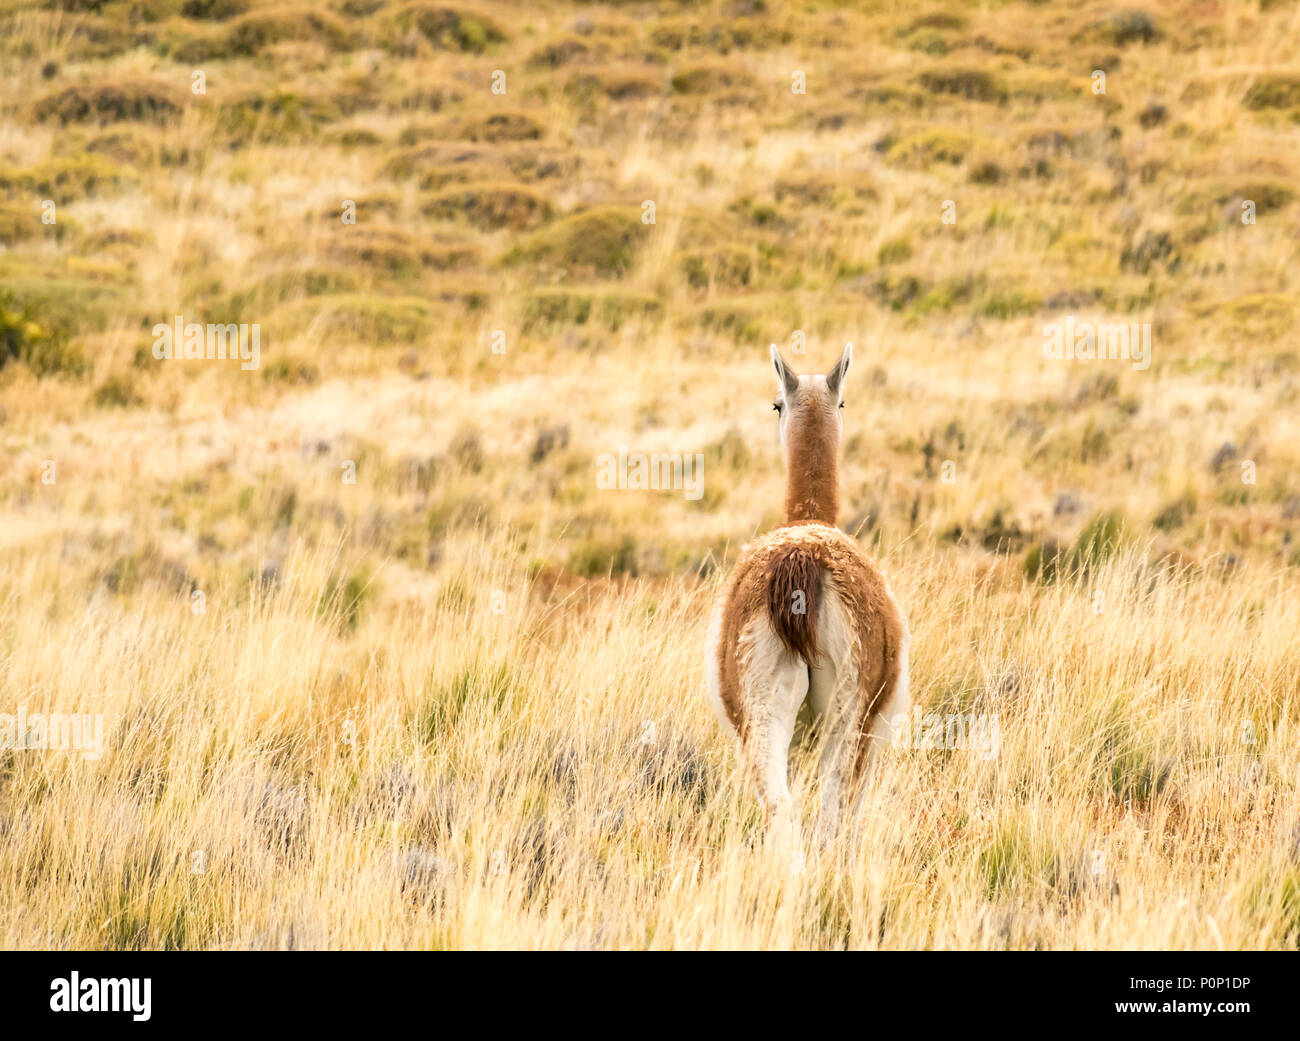 Rear view of guanaco, Lama guanicoe, Torres del Paine National Park, Patagonia, Chile, South America Stock Photo